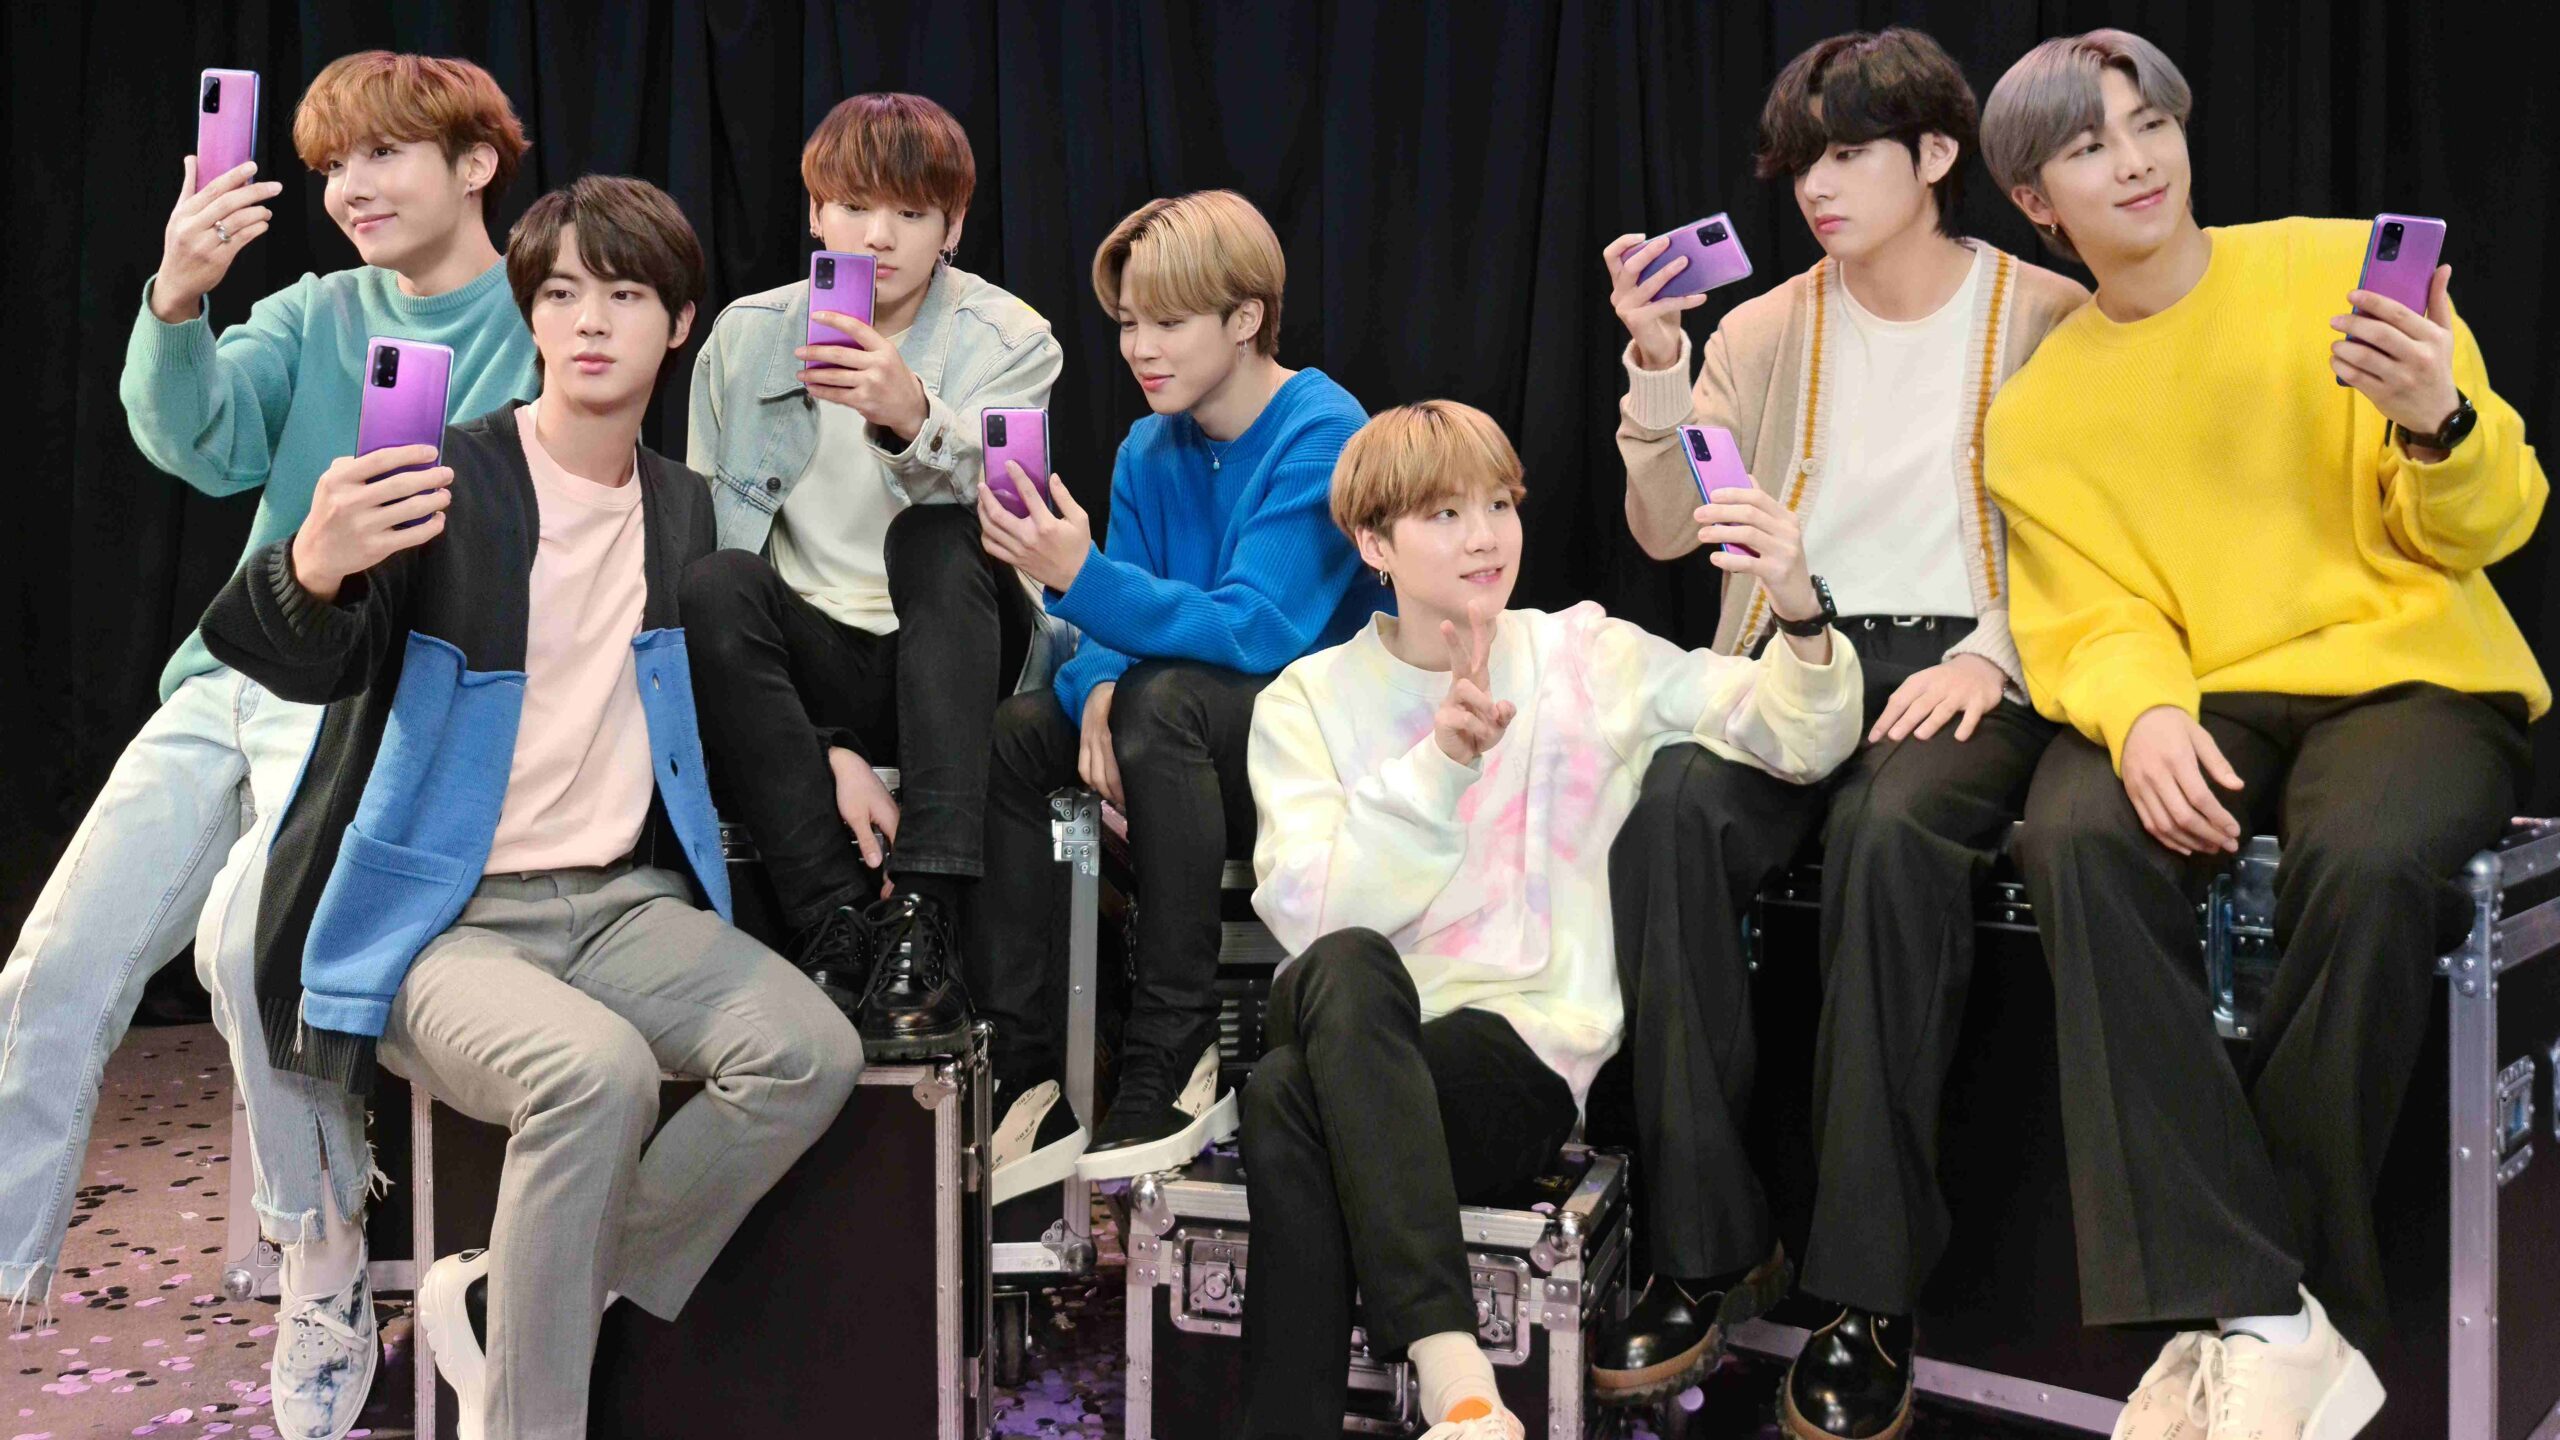 The BTS edition of the Samsung Galaxy S20+ is coming to the Philippines